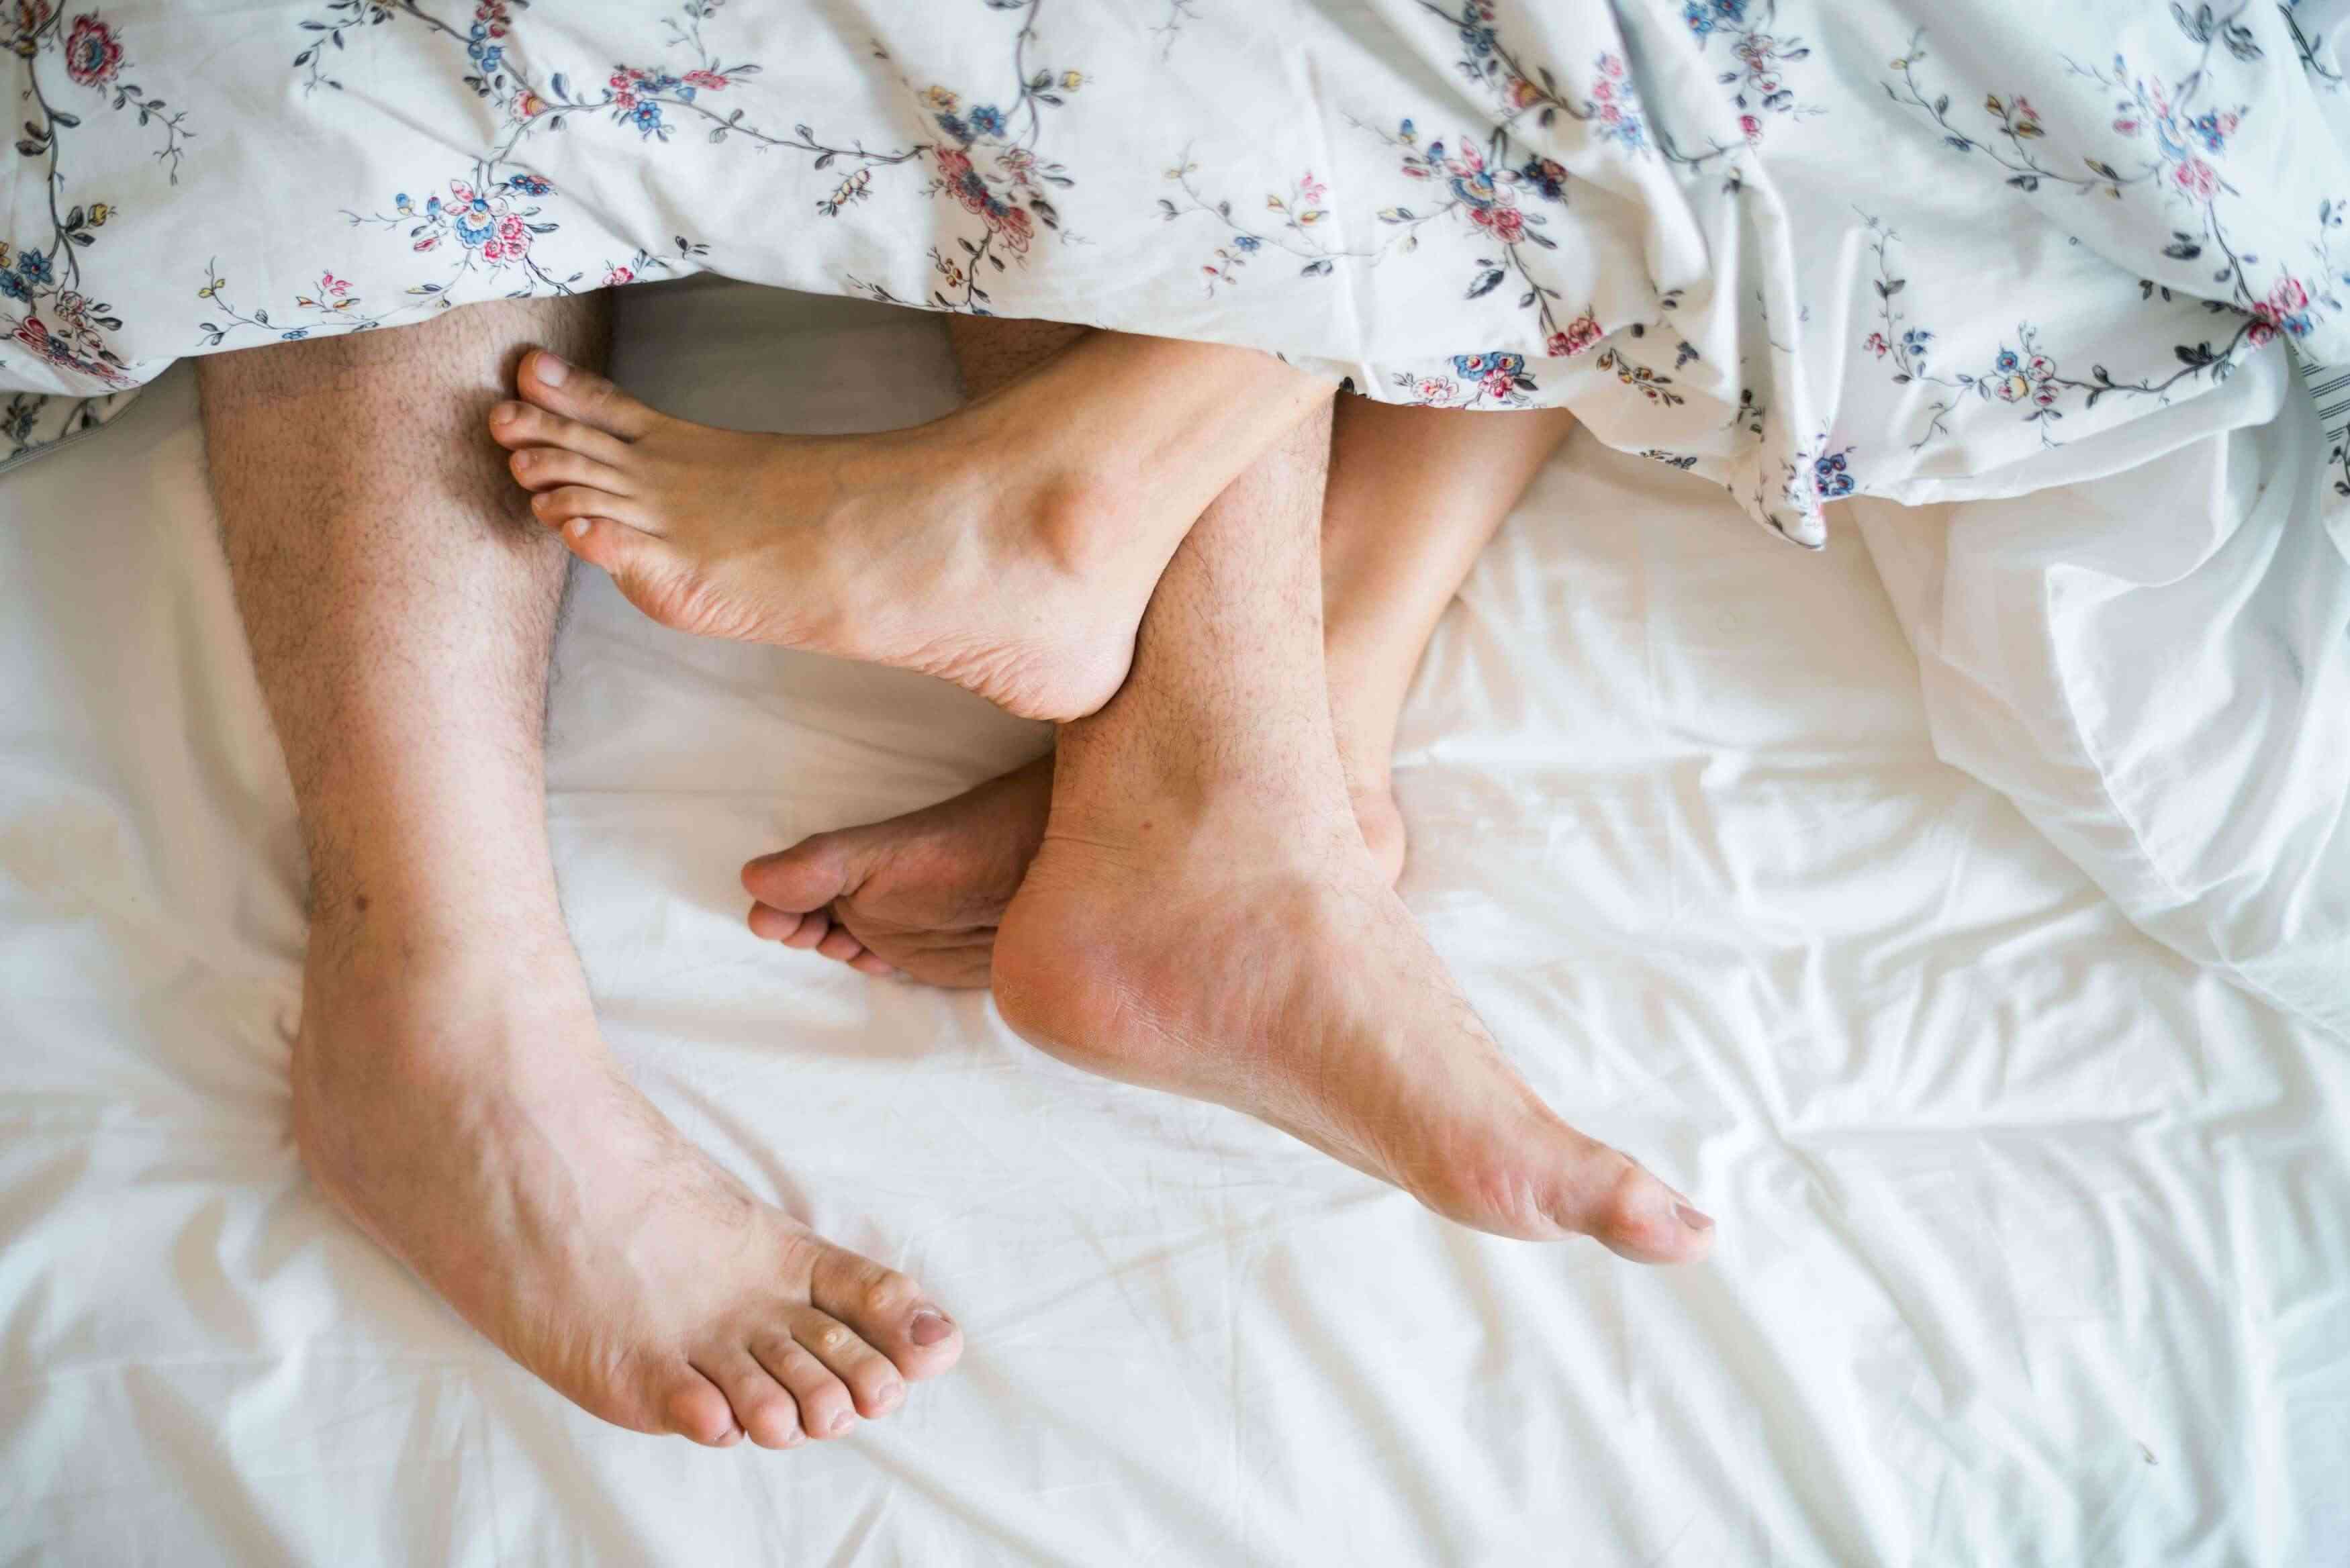 How Sexual Fetishism Can Impact Your Relationship BetterHelp